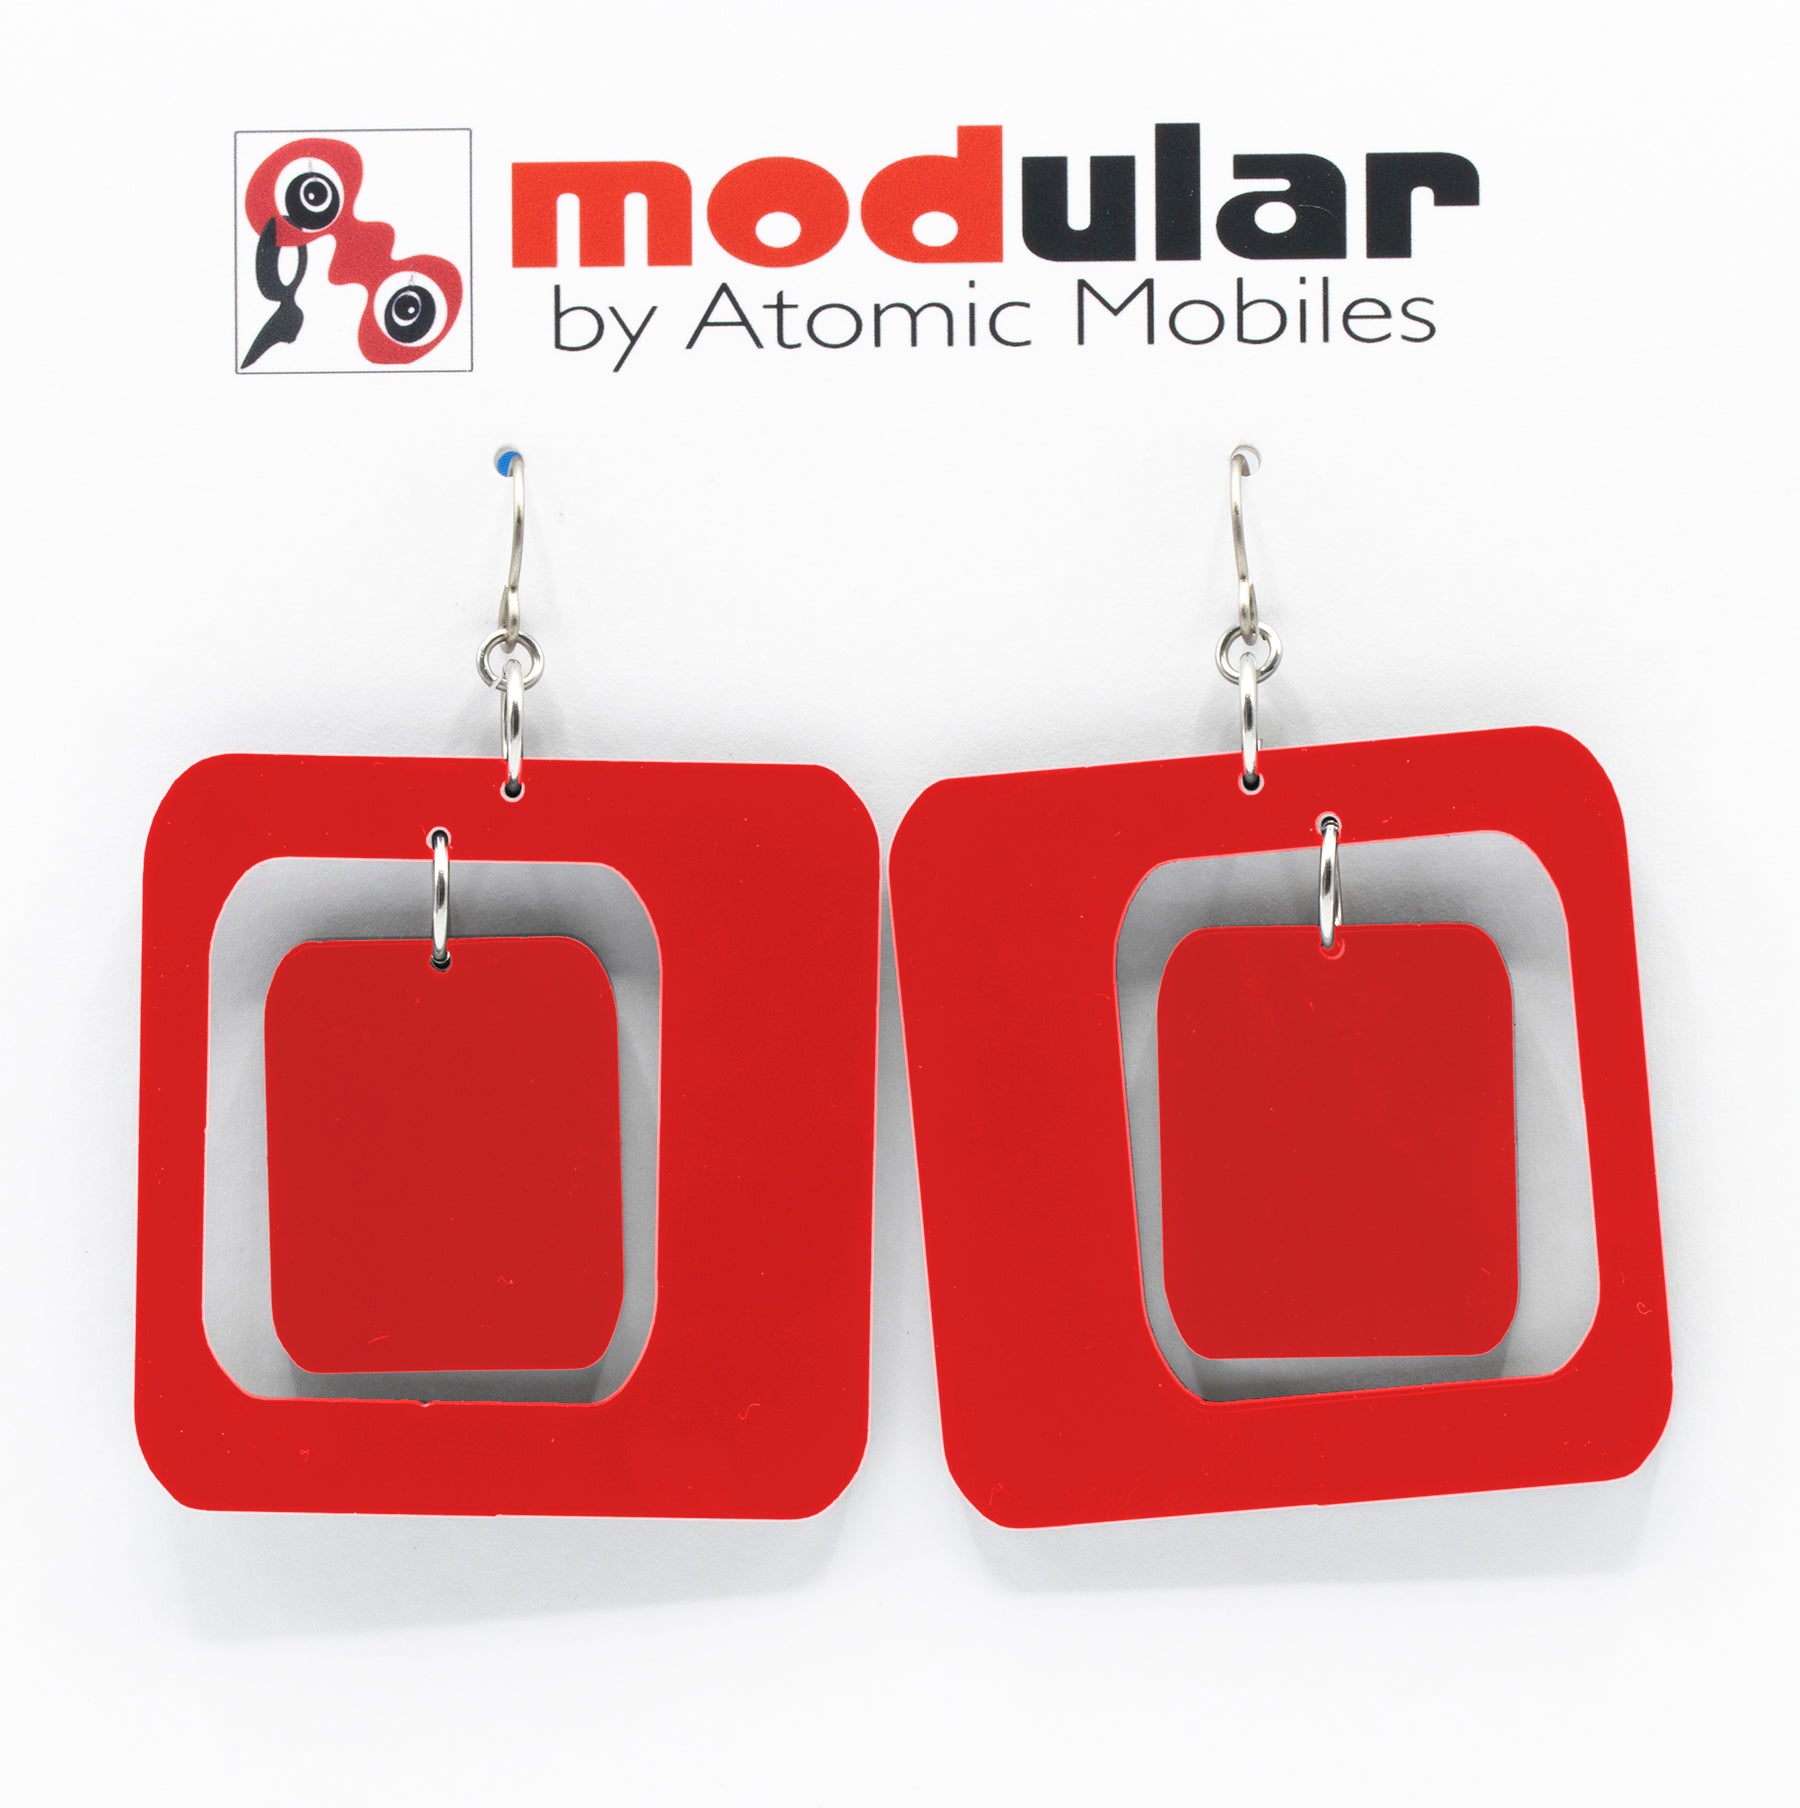 MODular Earrings - Coolsville Statement Earrings in Red by AtomicMobiles.com - retro era inspired mod handmade jewelry